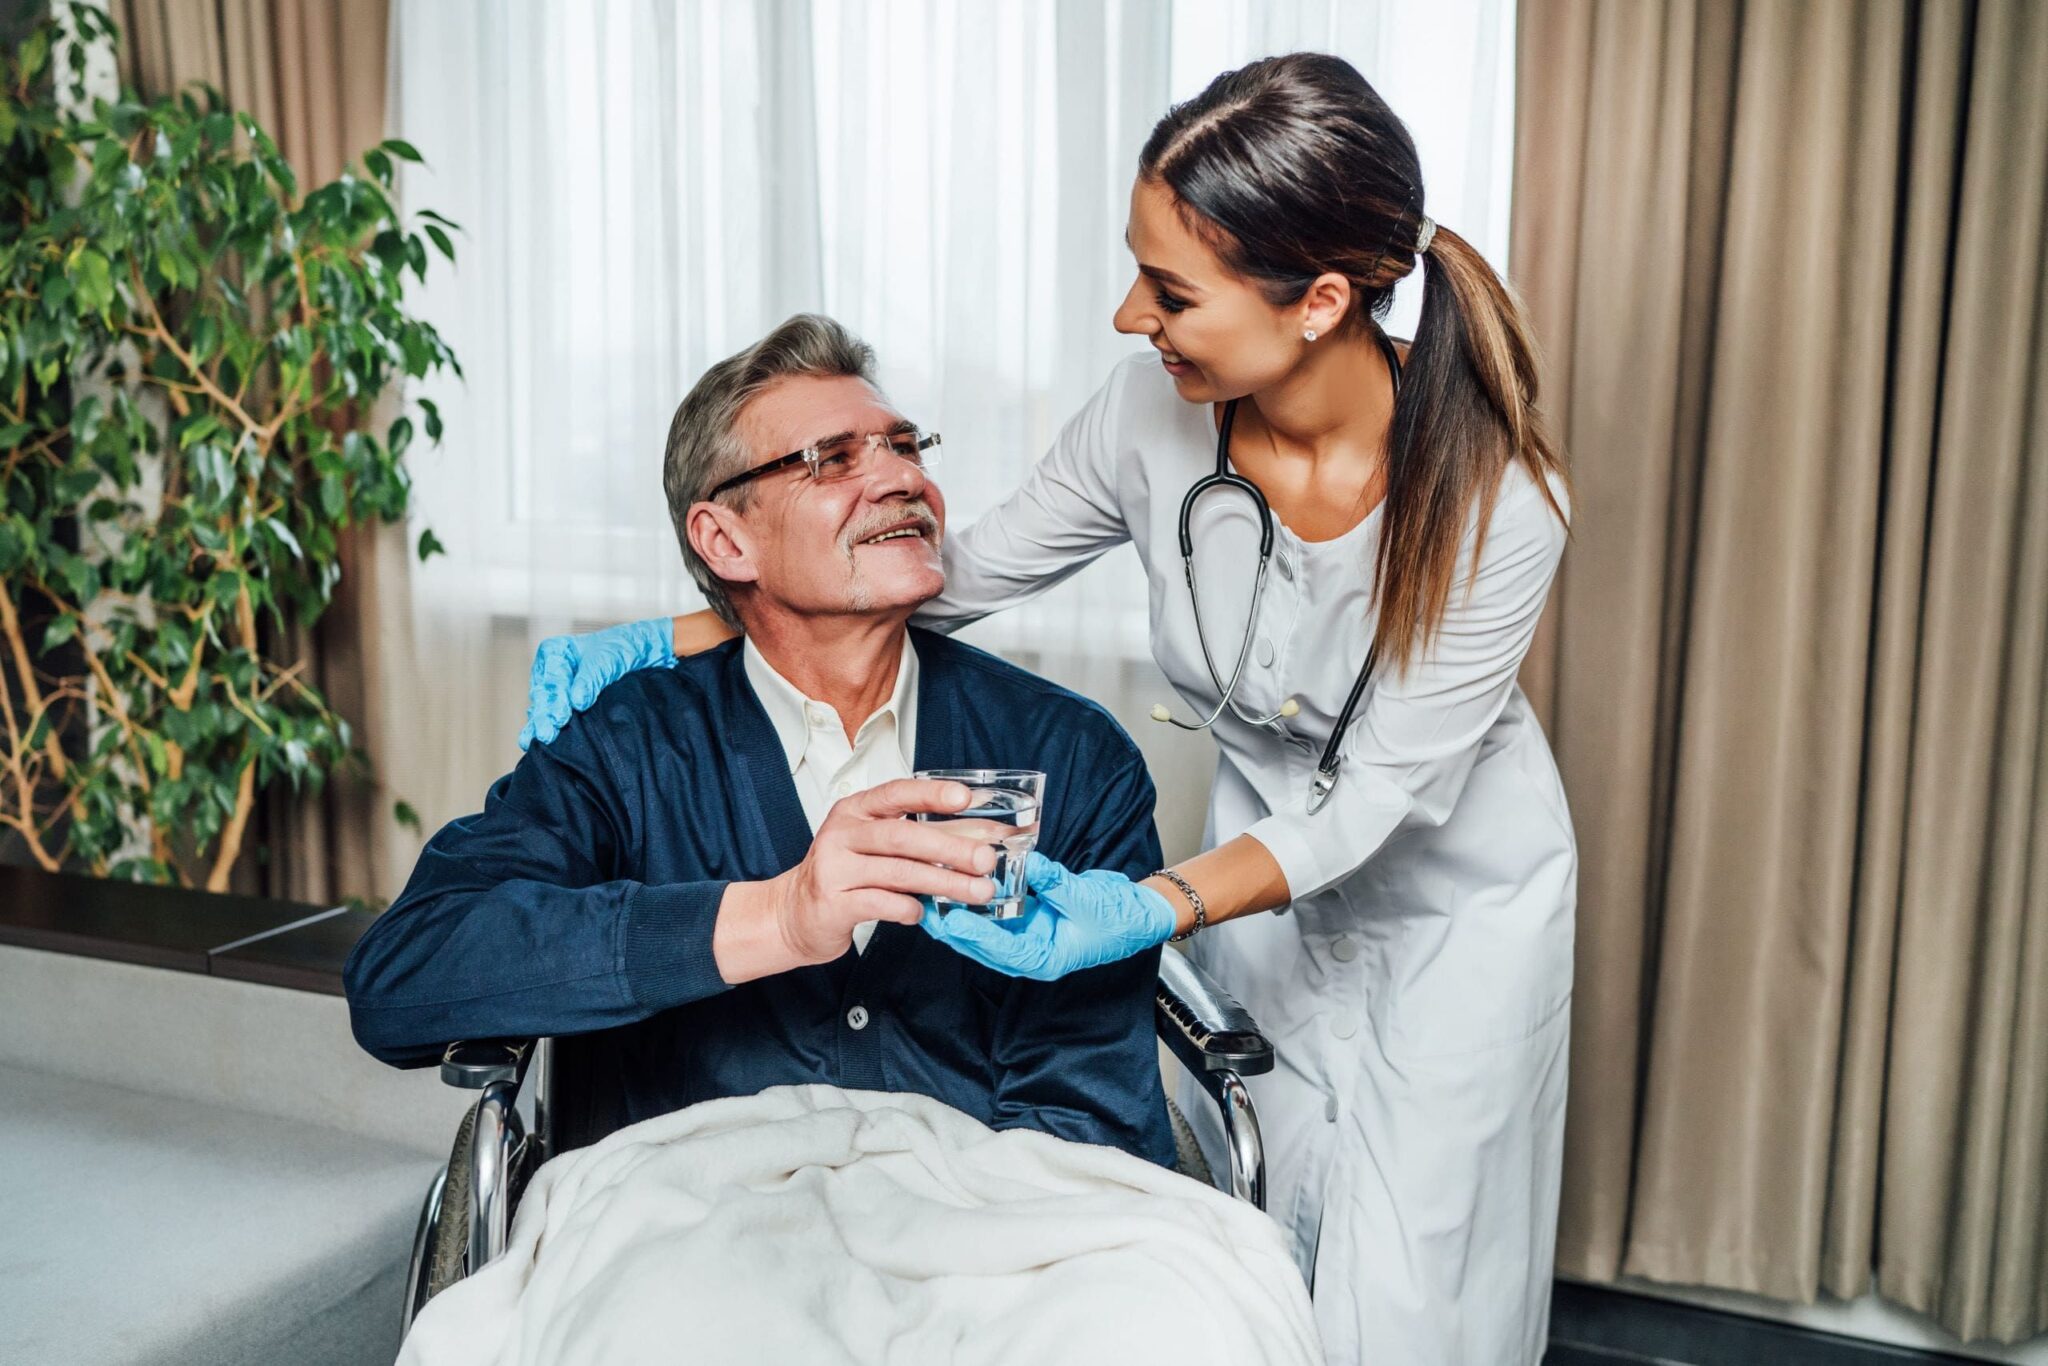 How Nurses Can Provide Emotional Support To Their Patient